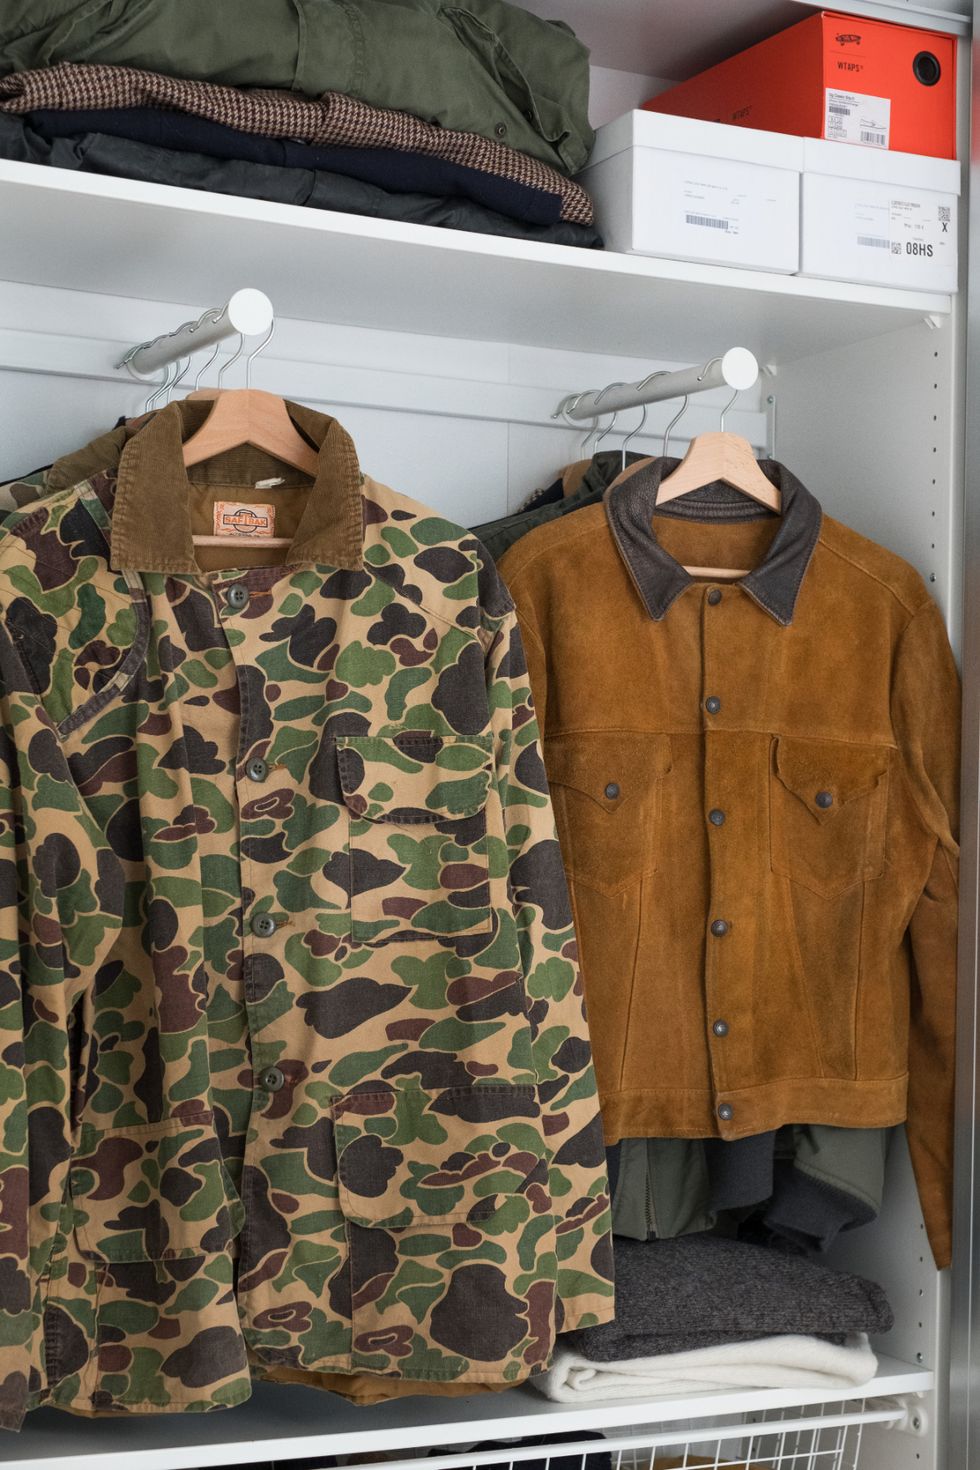 a pair of brown and black jackets on a shelf